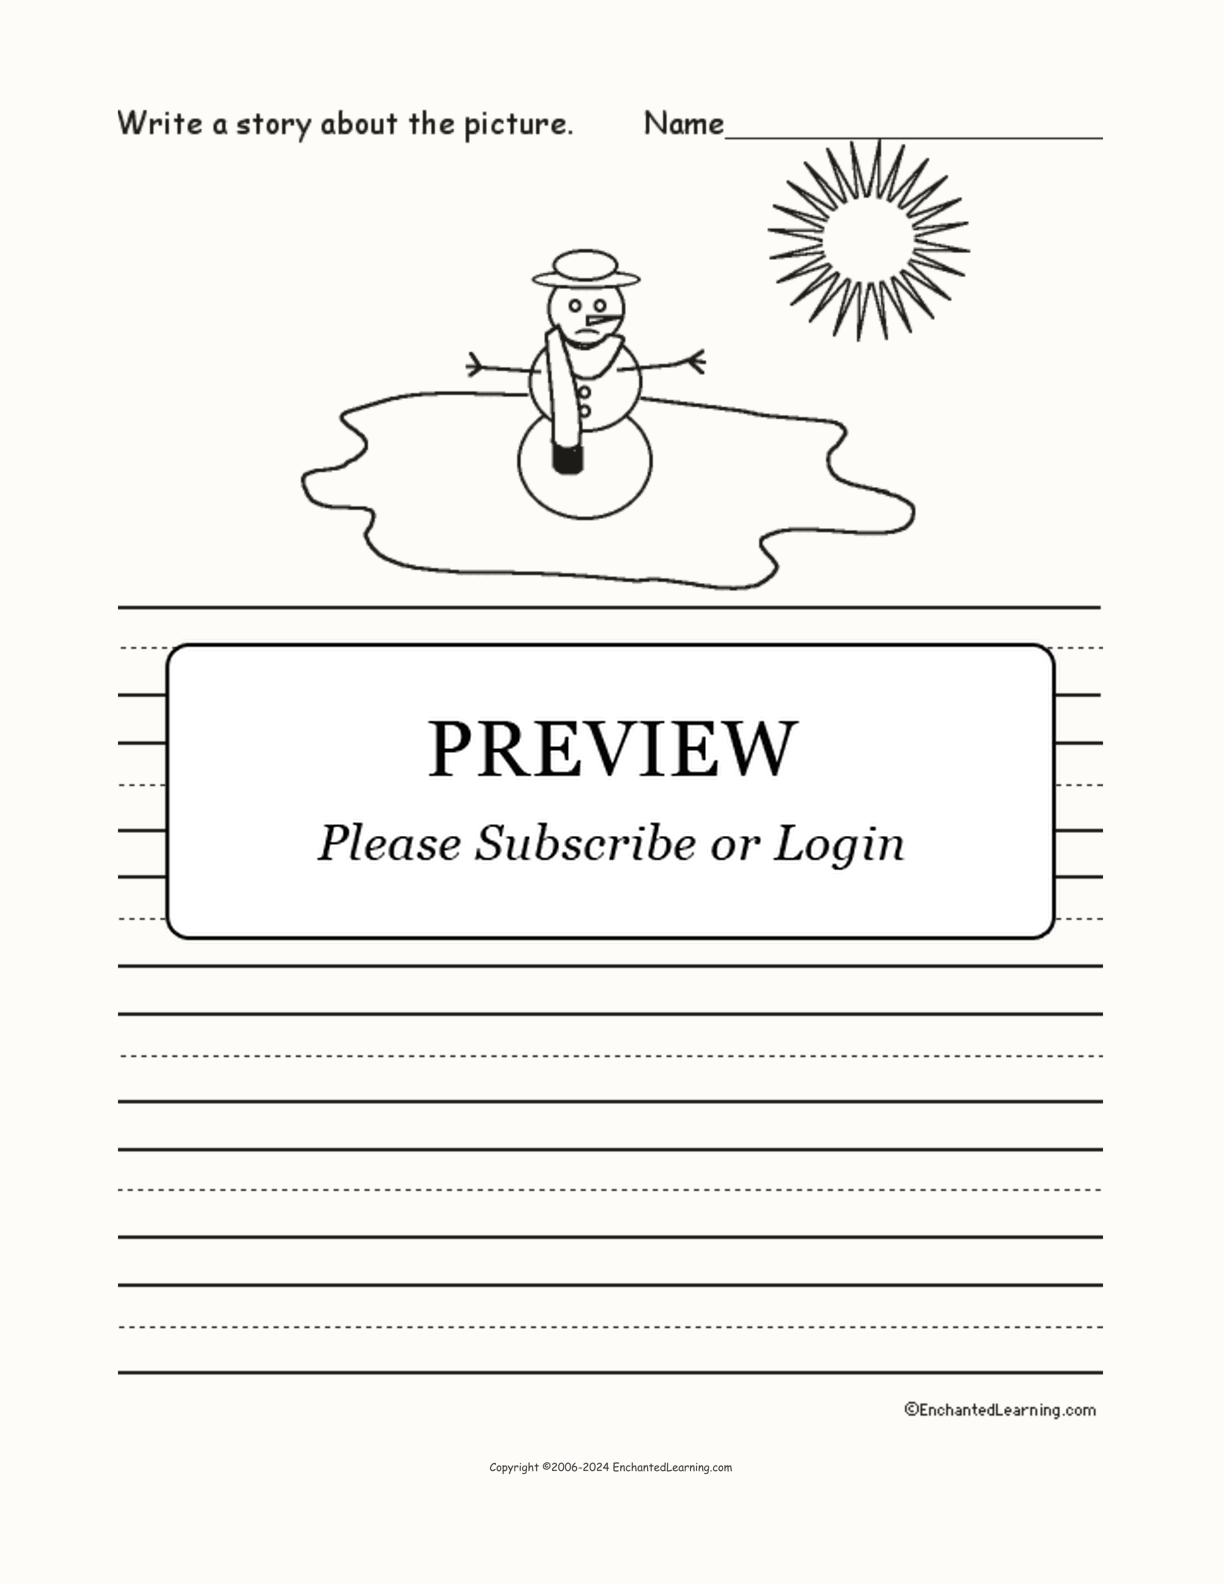 Picture Prompts - Snowman Melting Scene interactive worksheet page 1